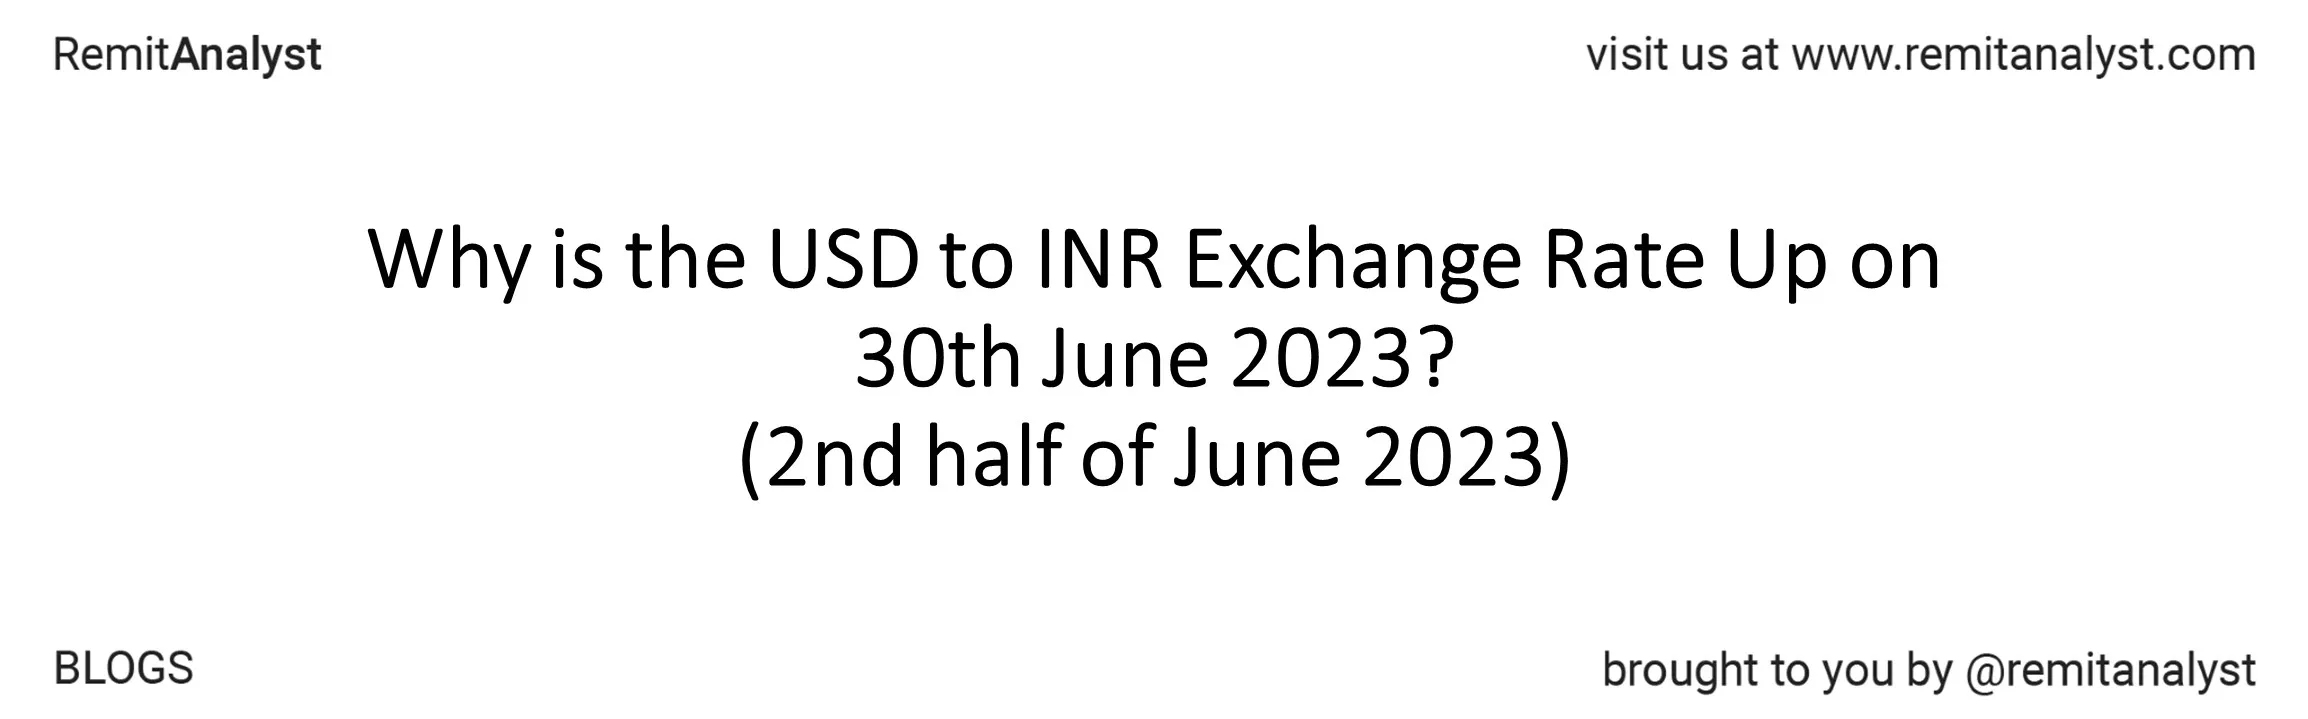 usd-to-inr-exchange-rate-16-june-2023-to-30-june-2023-title